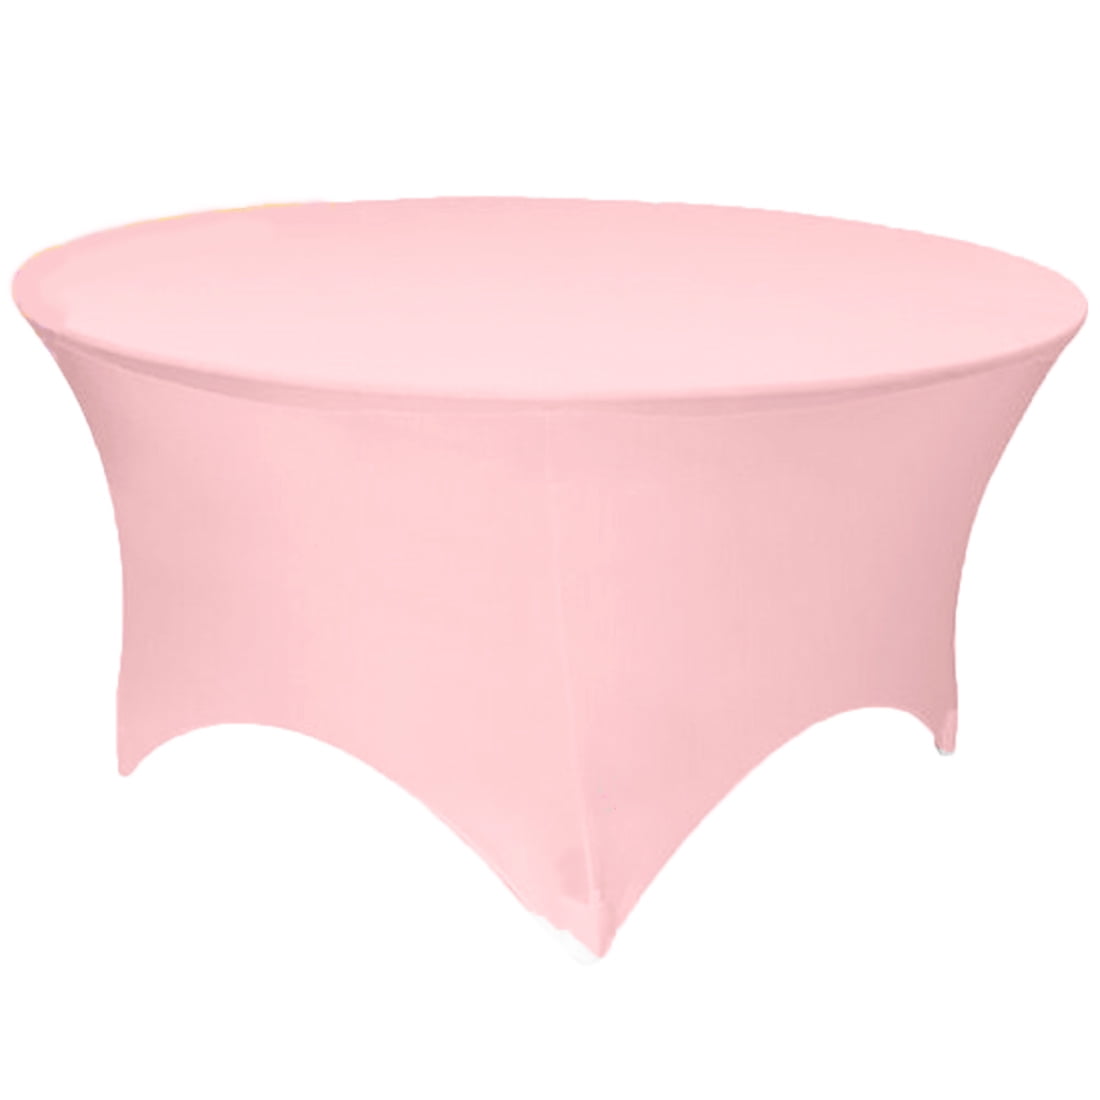 Gowinex Pink 6 ft. 72 inch Round Spandex Tablecloth Fitted Table Cover